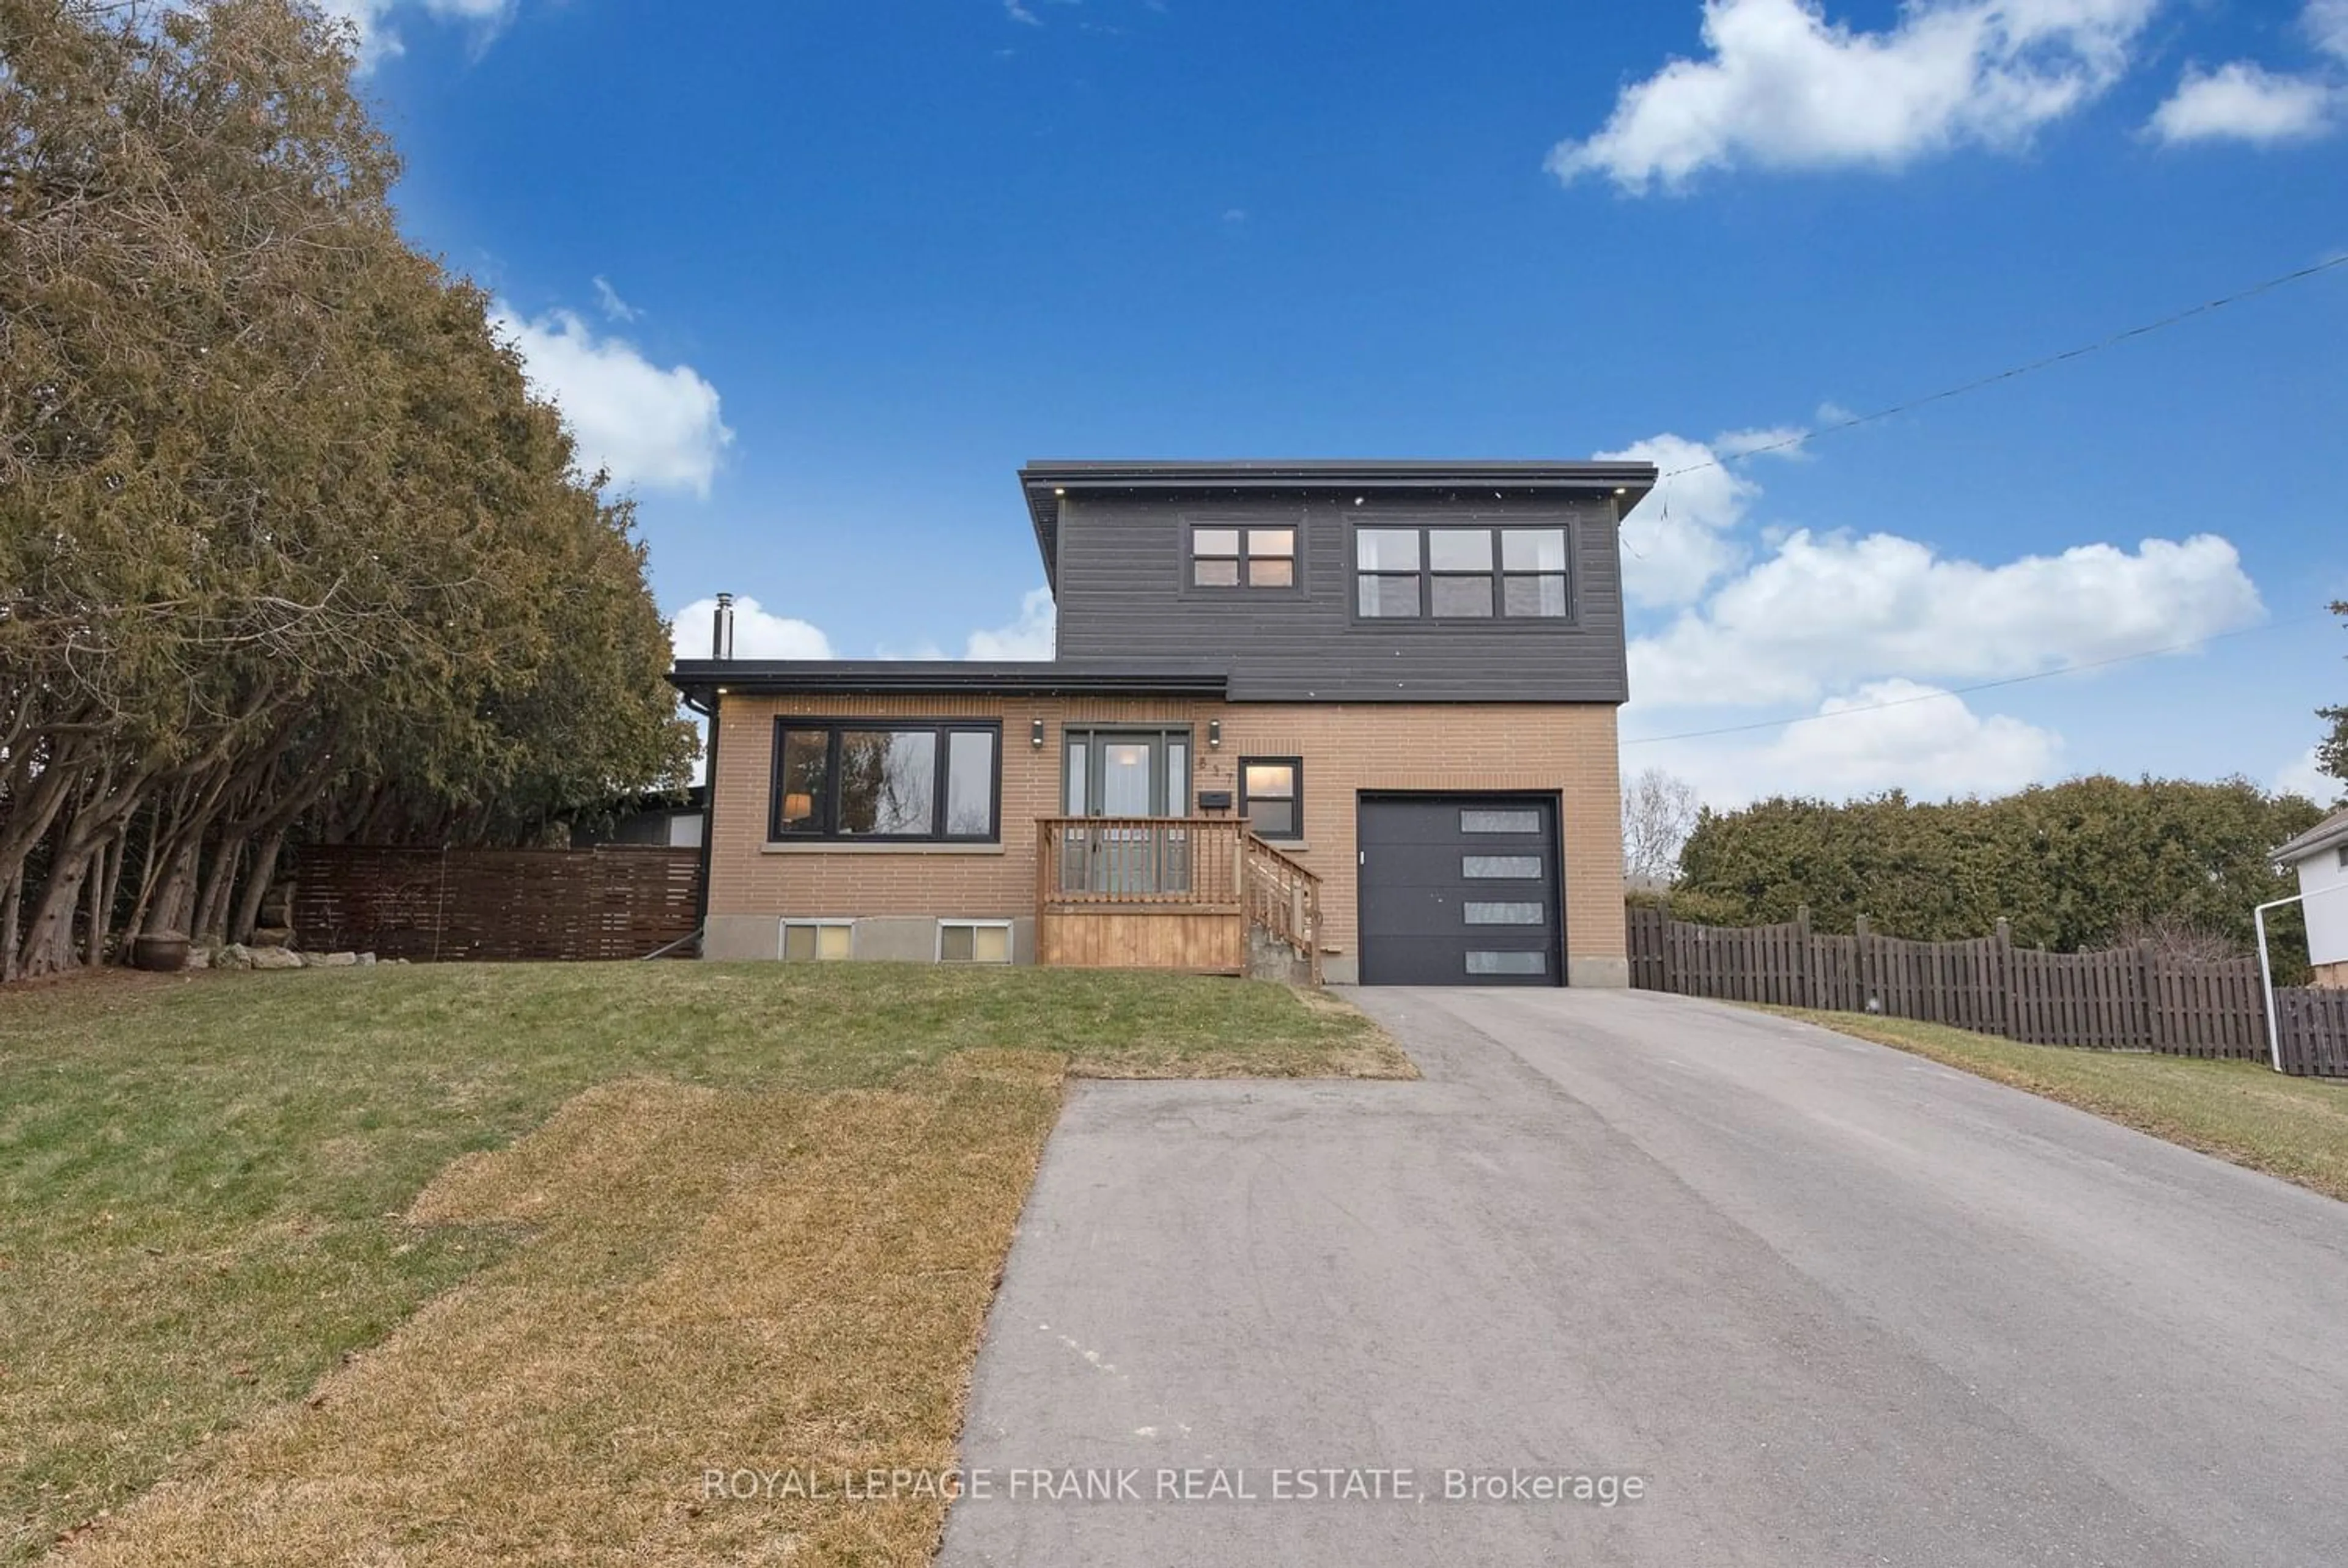 Home with unknown exterior material for 837 Glenwood Crt, Oshawa Ontario L1G 3H8